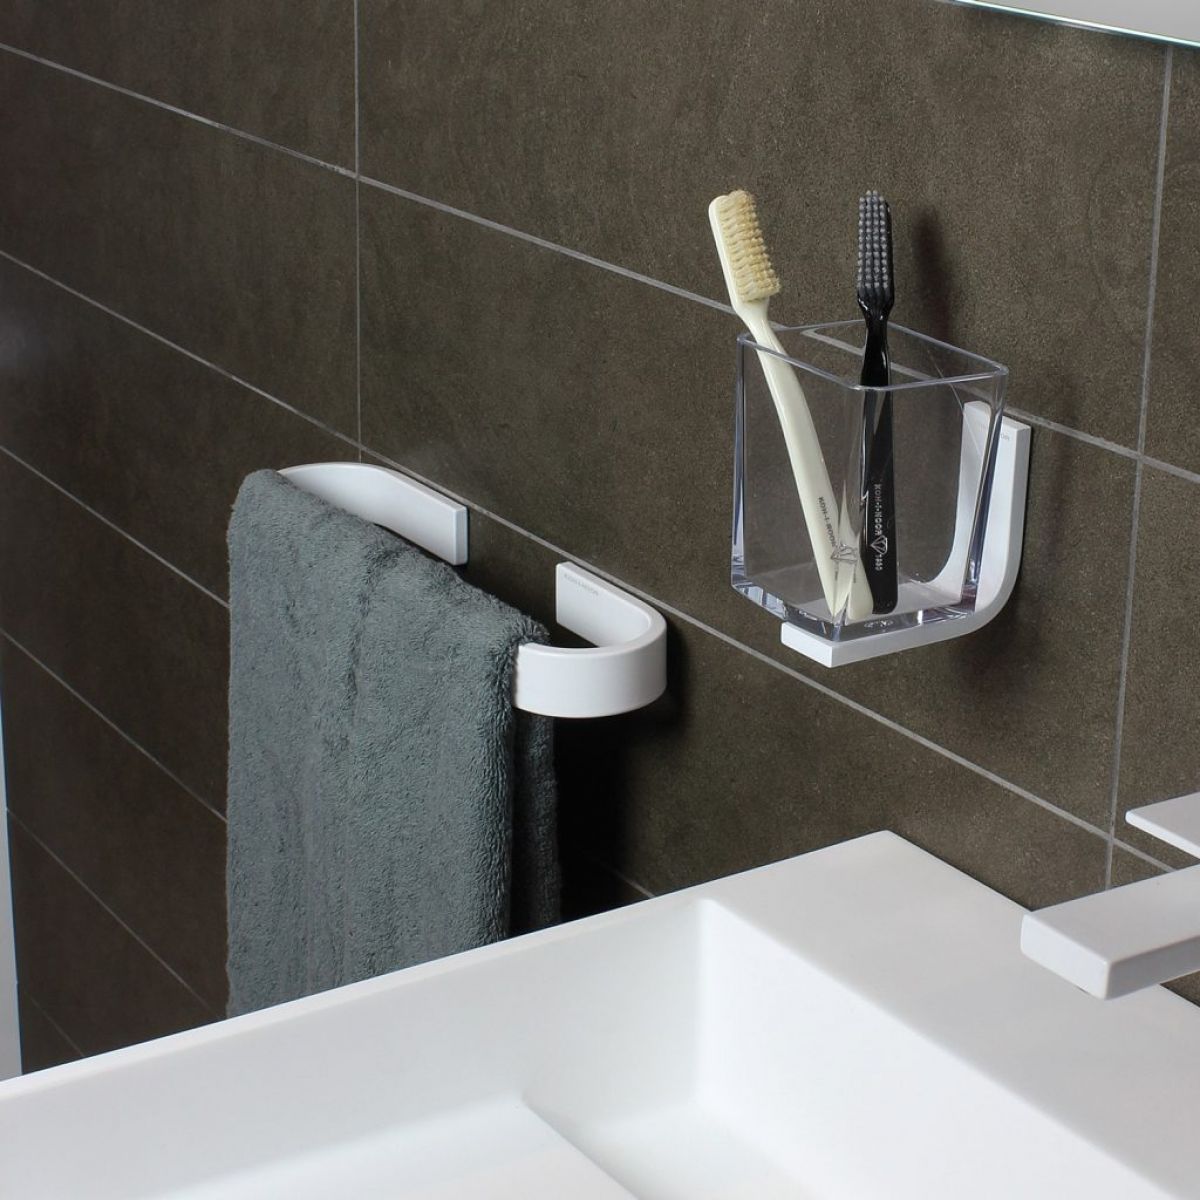 Placing the Towel Bars for Bathrooms at the Correct Height – Materia